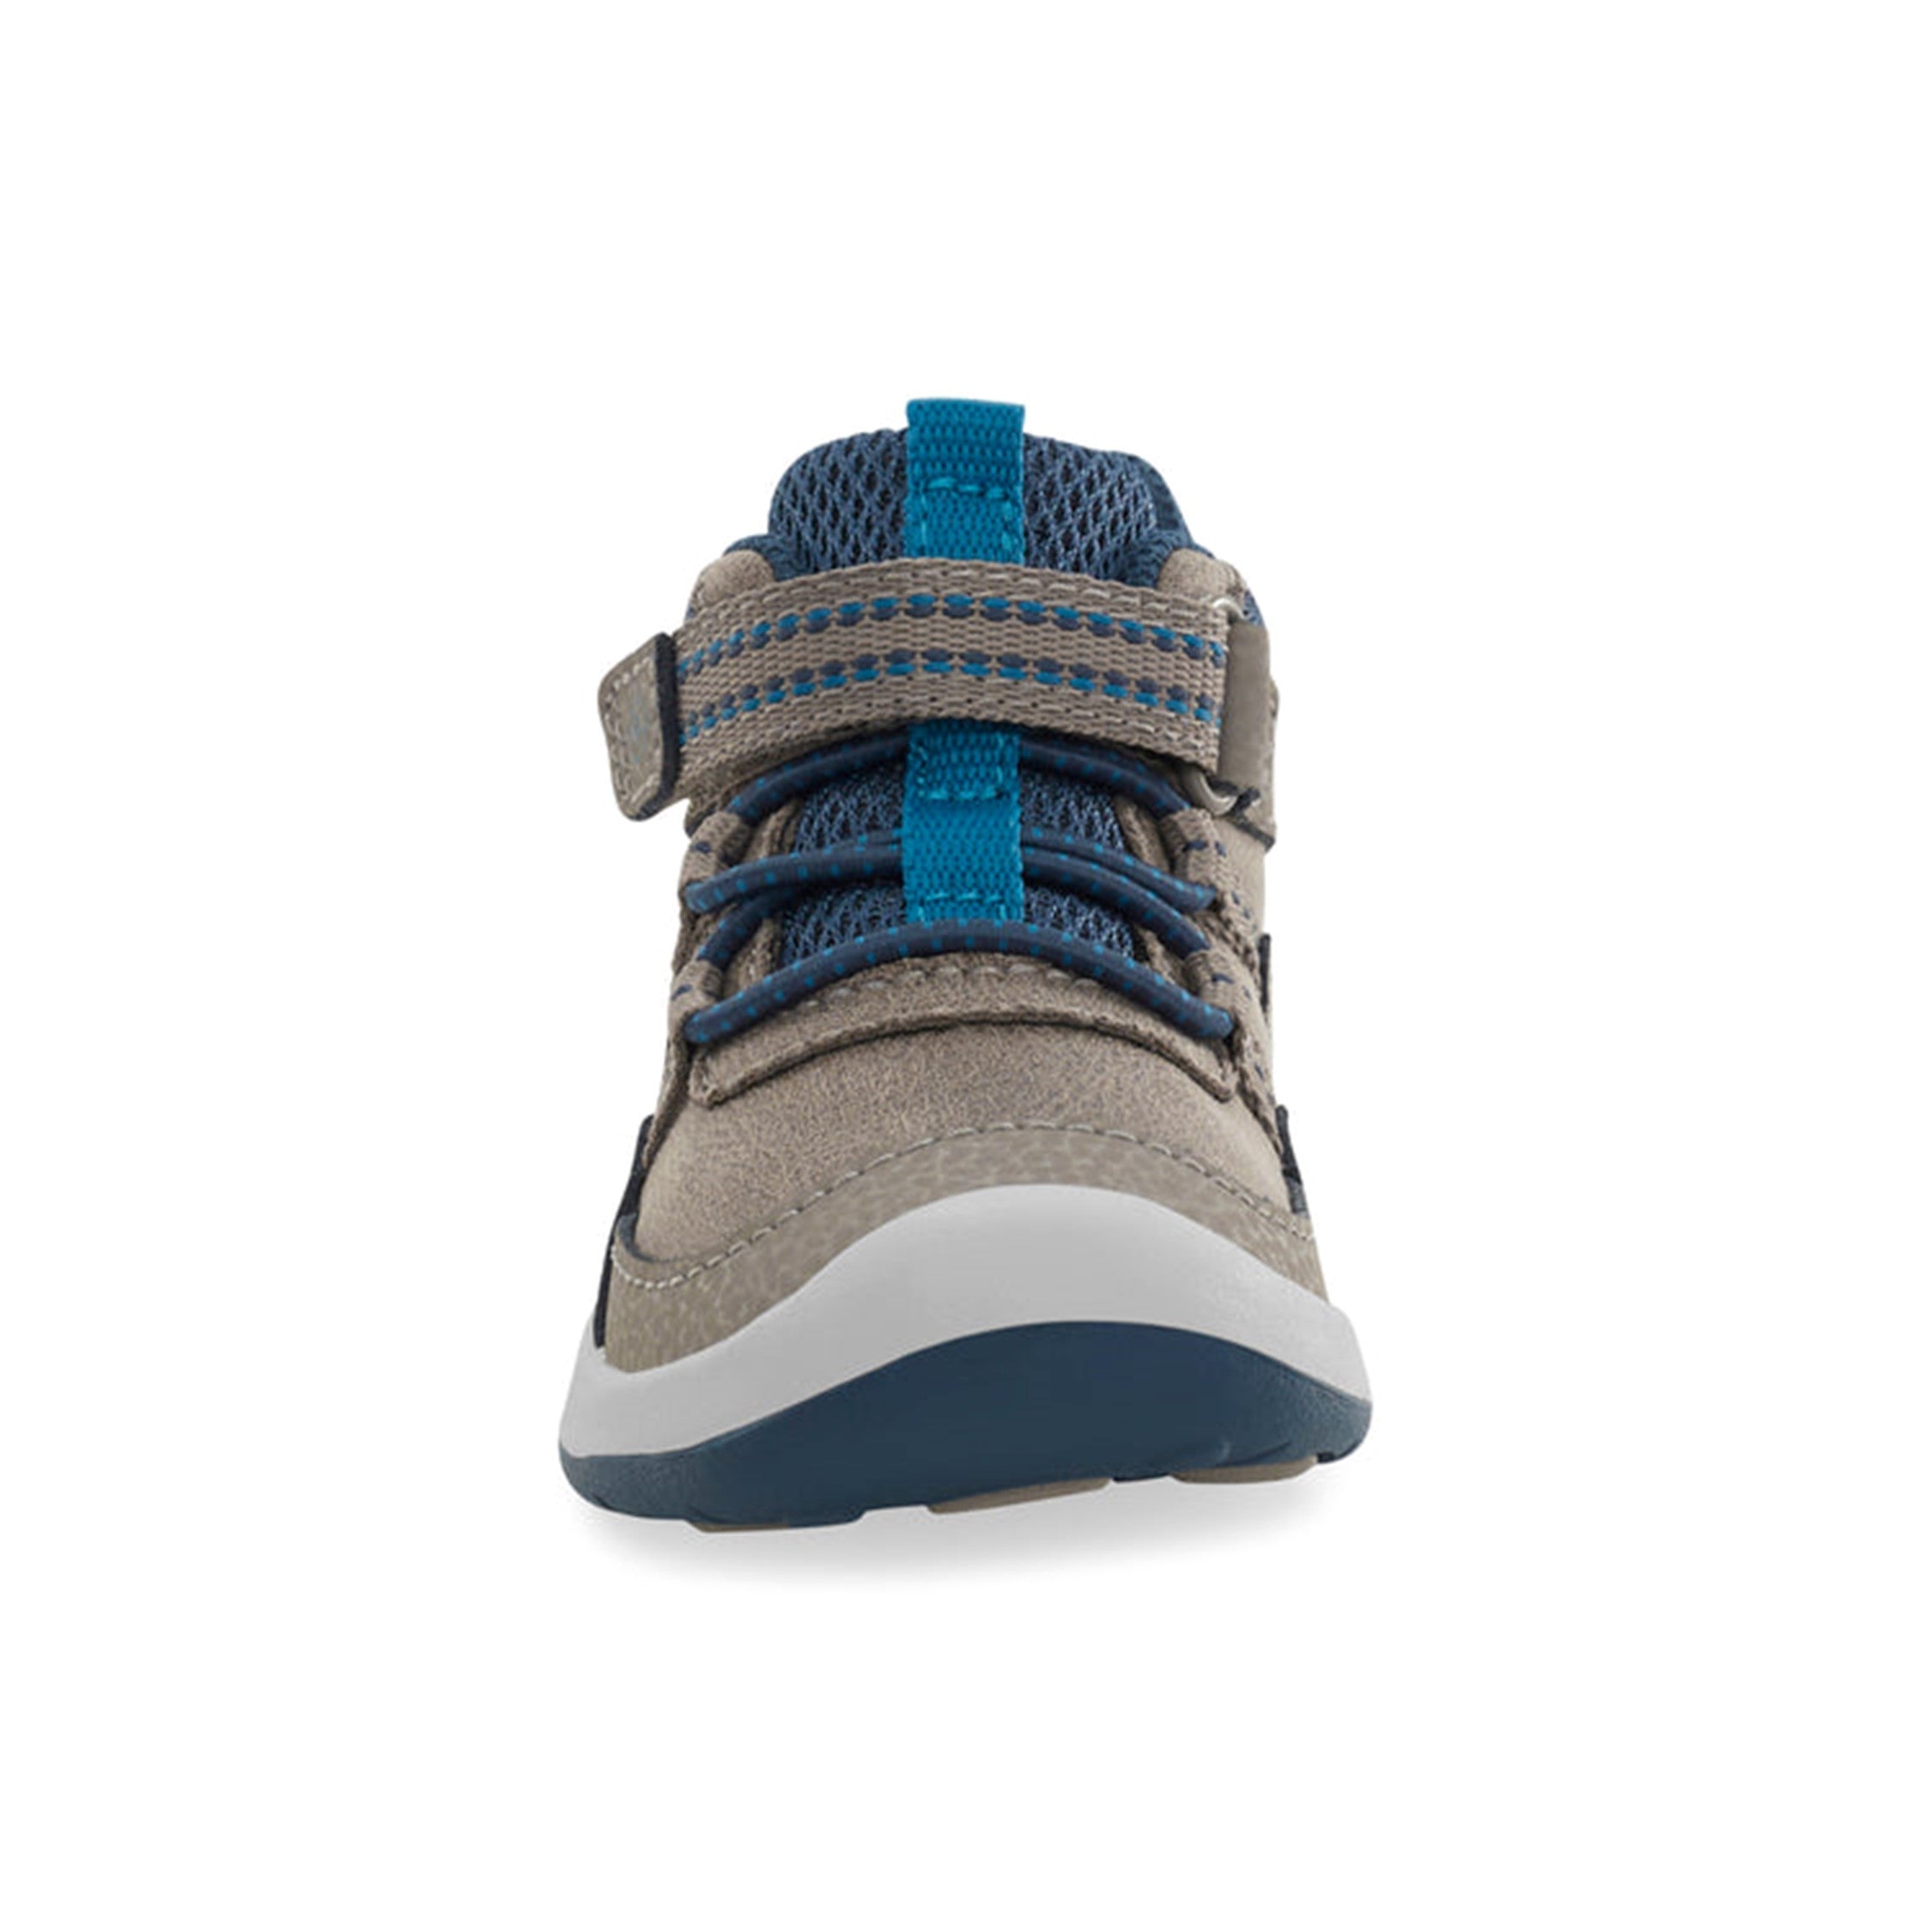 SRT Rover Kid's Leather Boot - Taupe/Blue